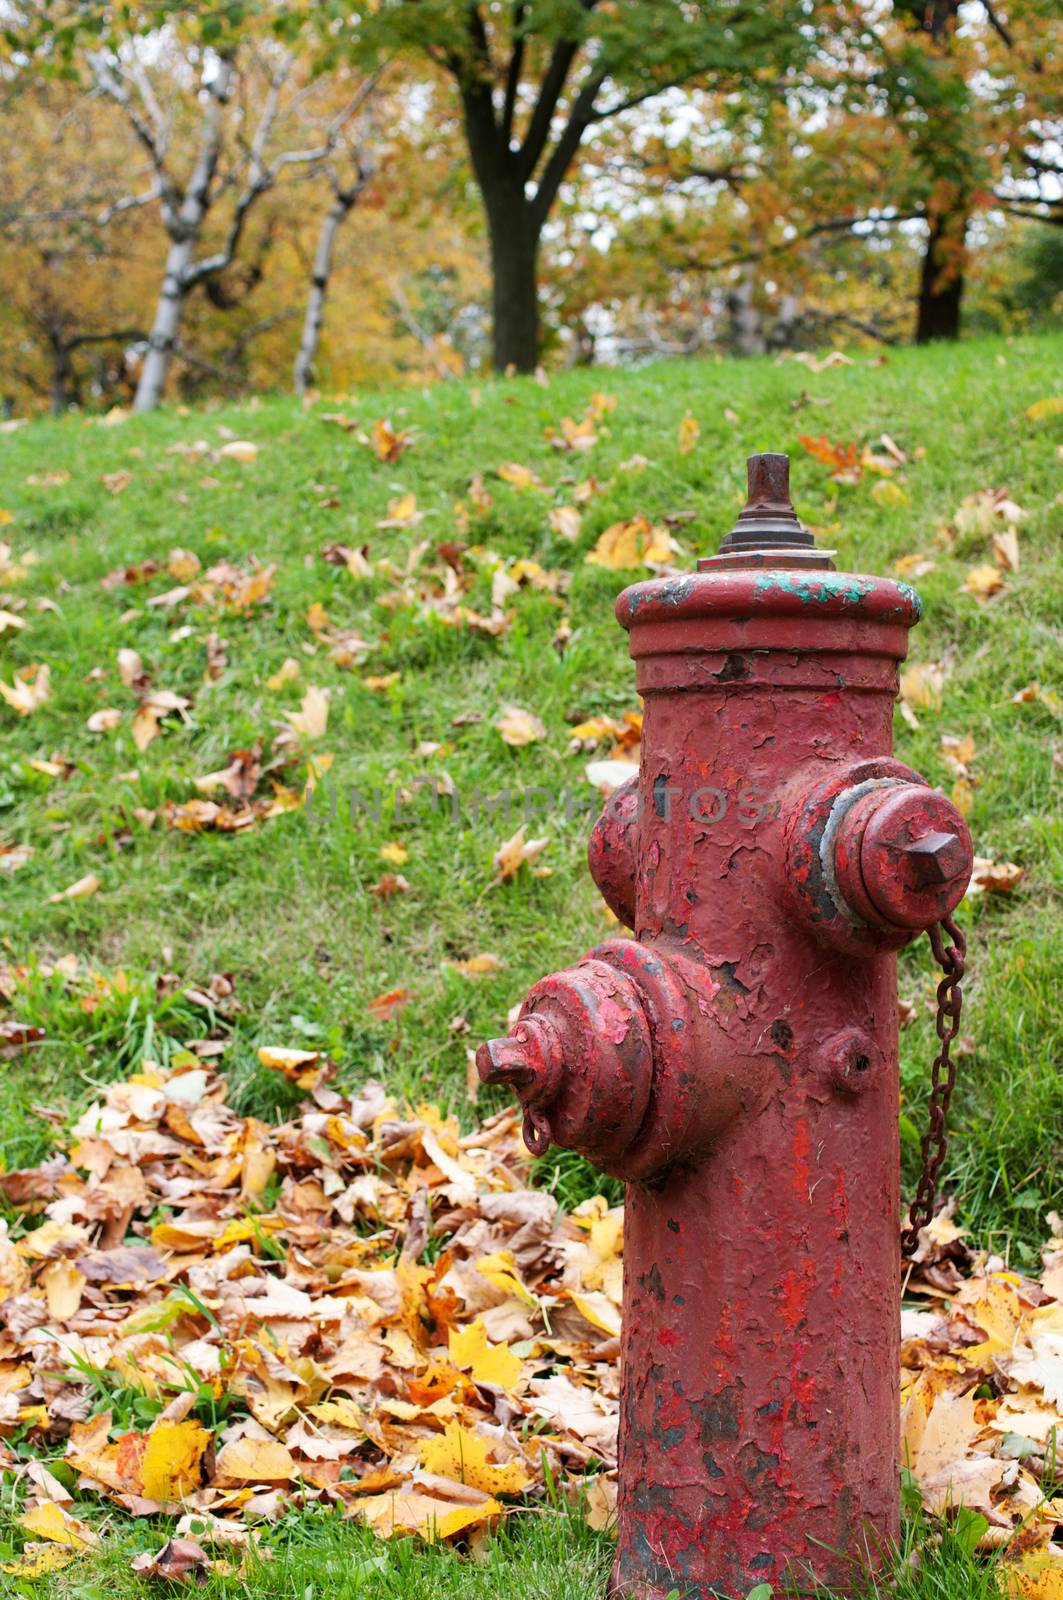 Rusty fire hydrant with dead leaves in autumn